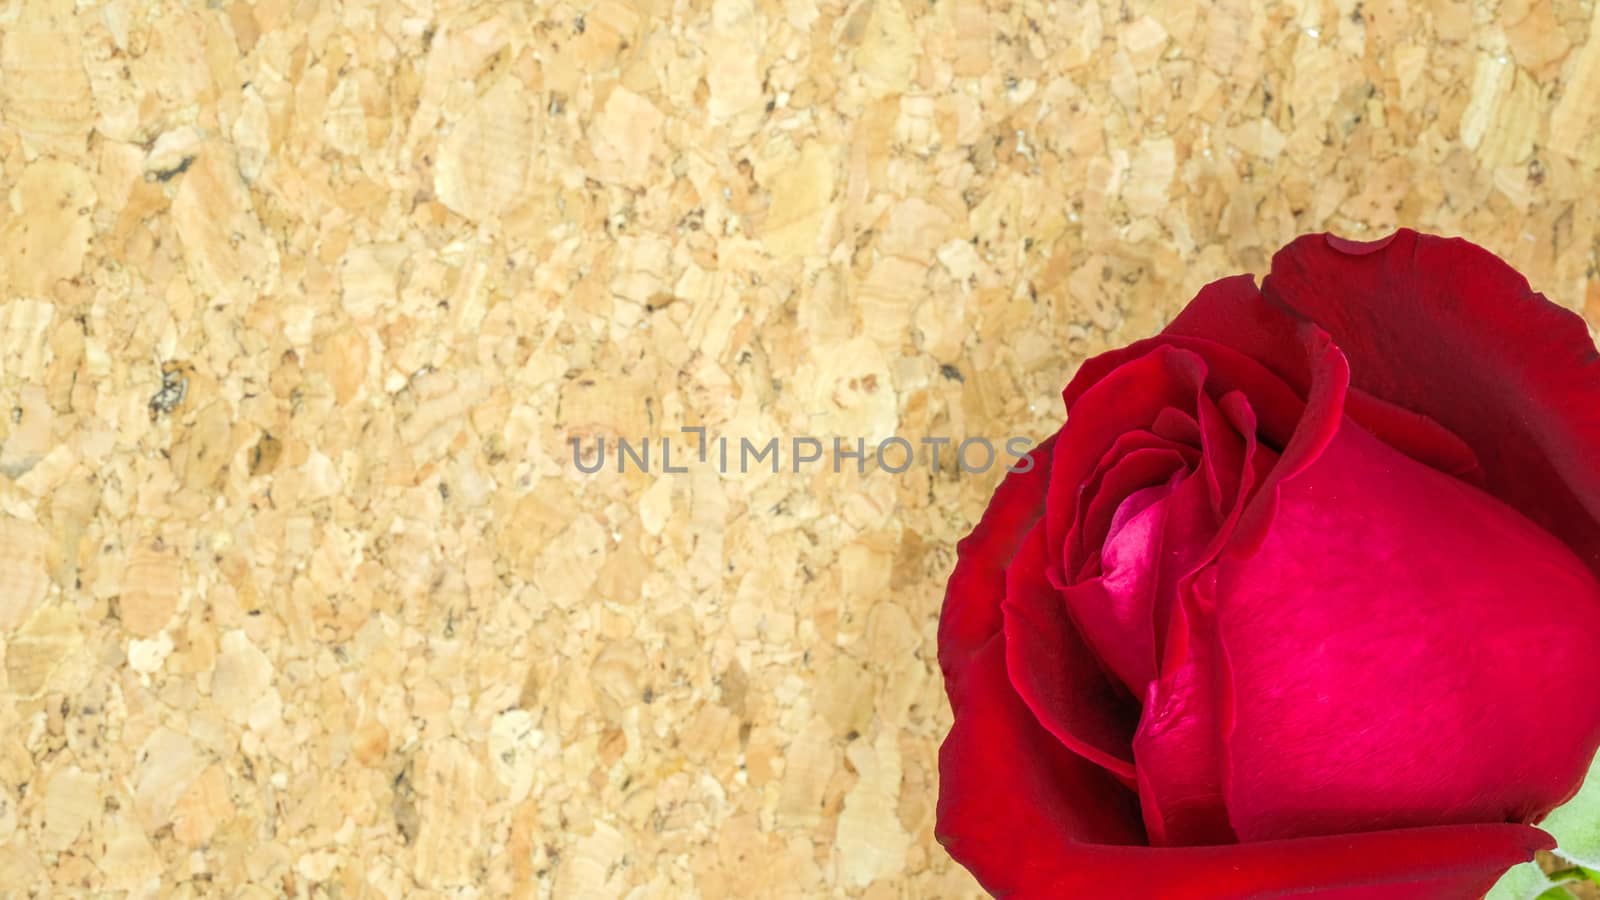 a beautiful single red rose and a cork message board background, closeup, selective focusing